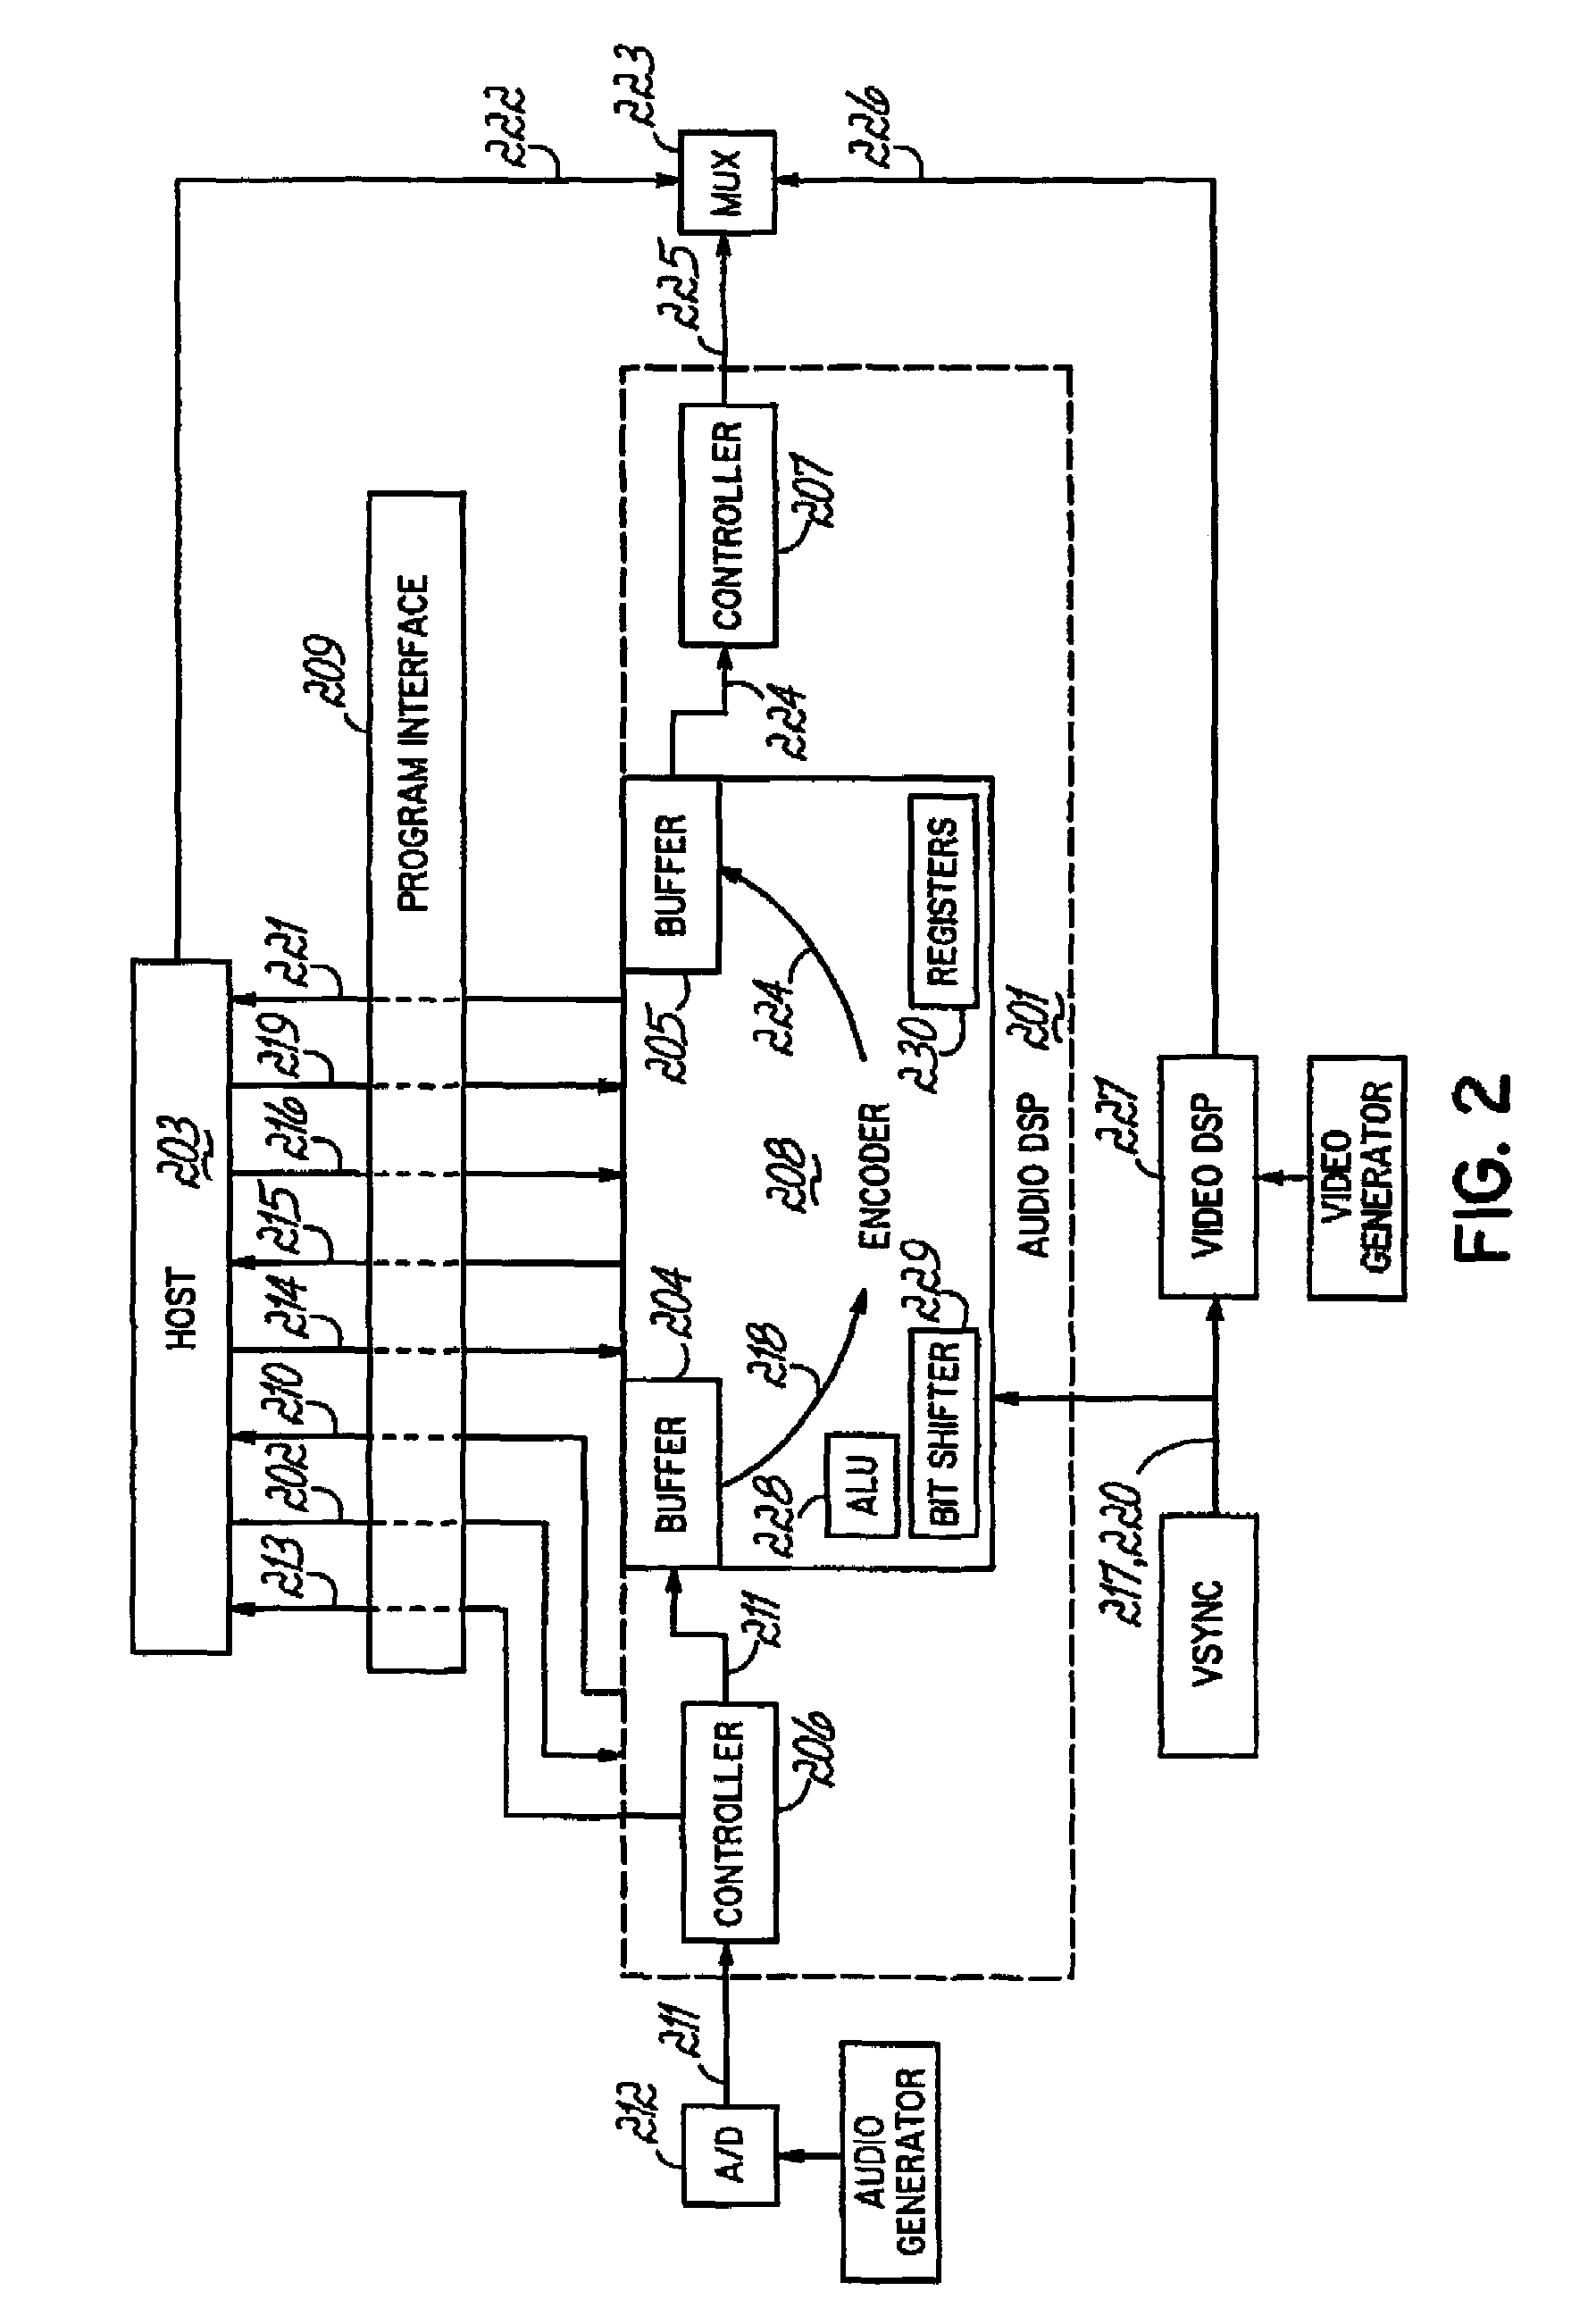 Start/stop audio encoder apparatus and method for synchronizing digital audio and video signals